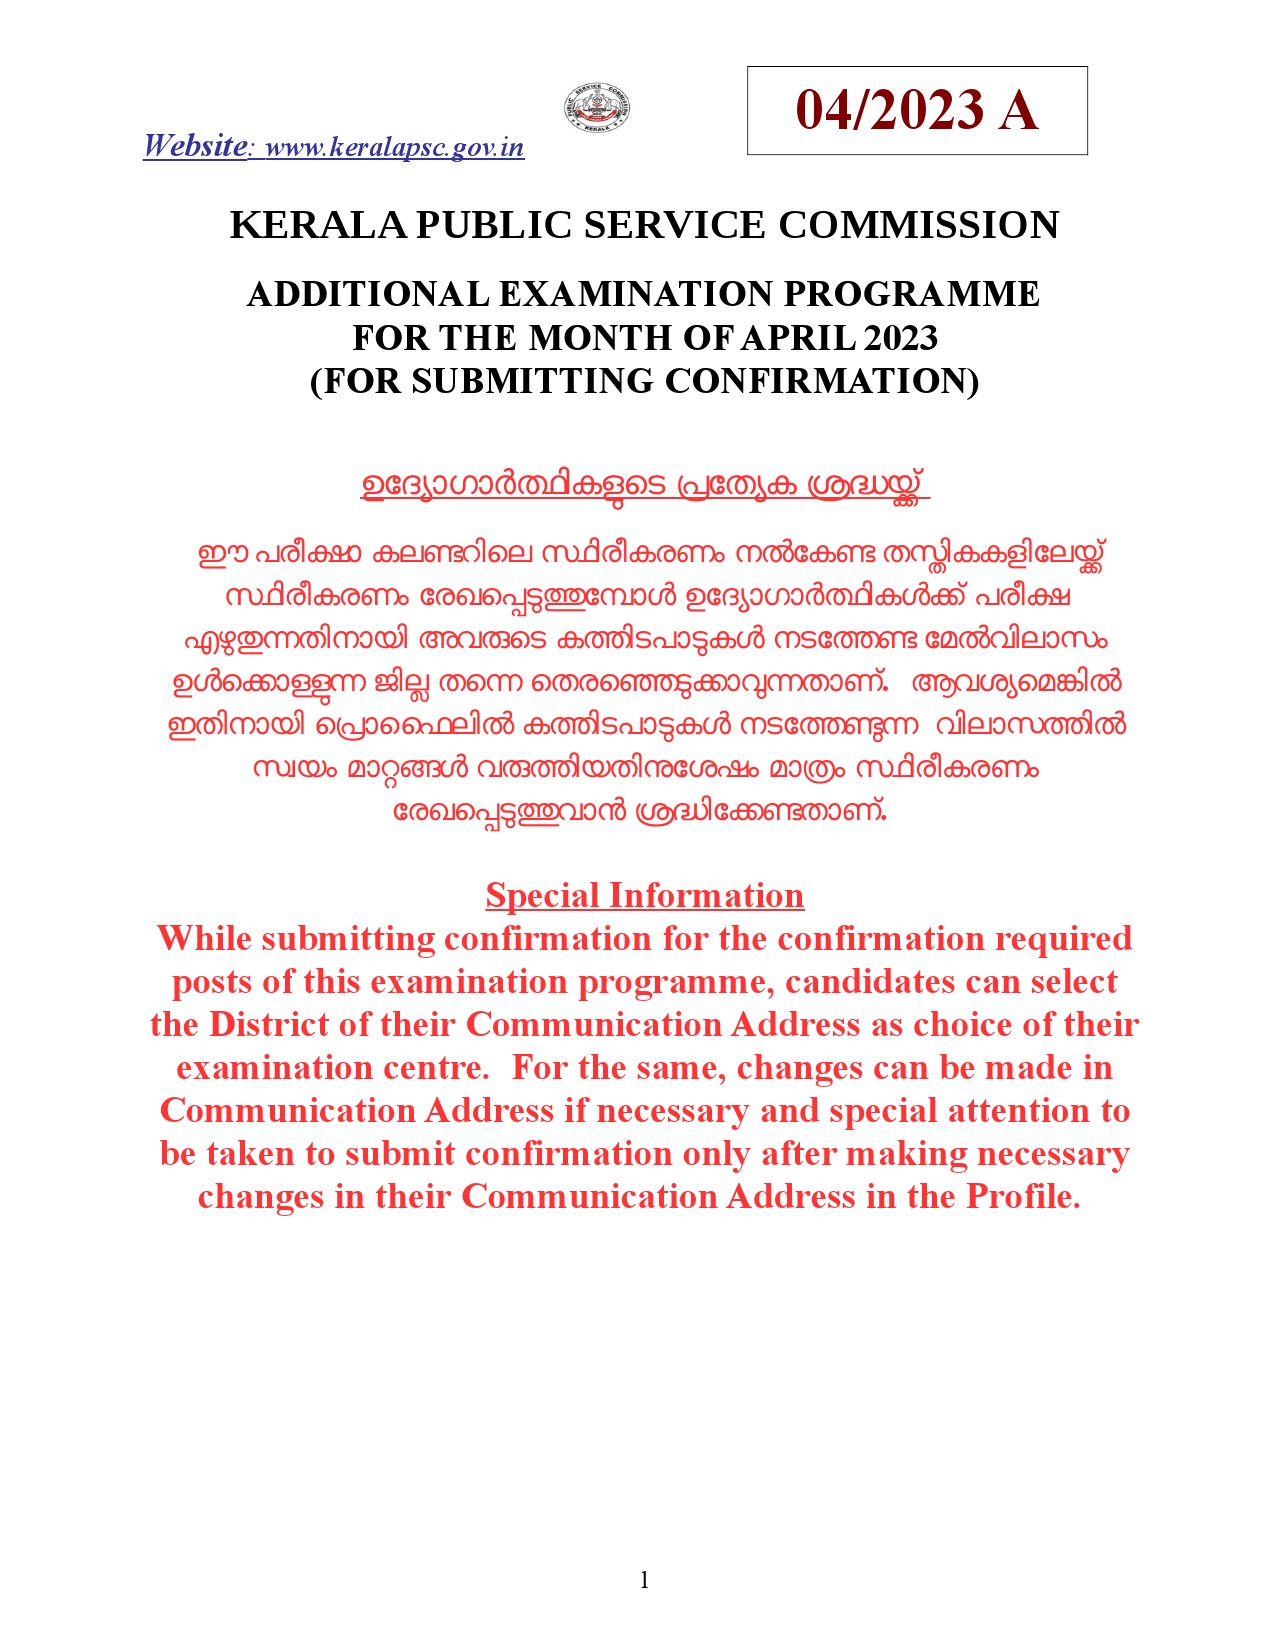 KPSC Additional Examination Programme For The Month Of April 2023 - Notification Image 1